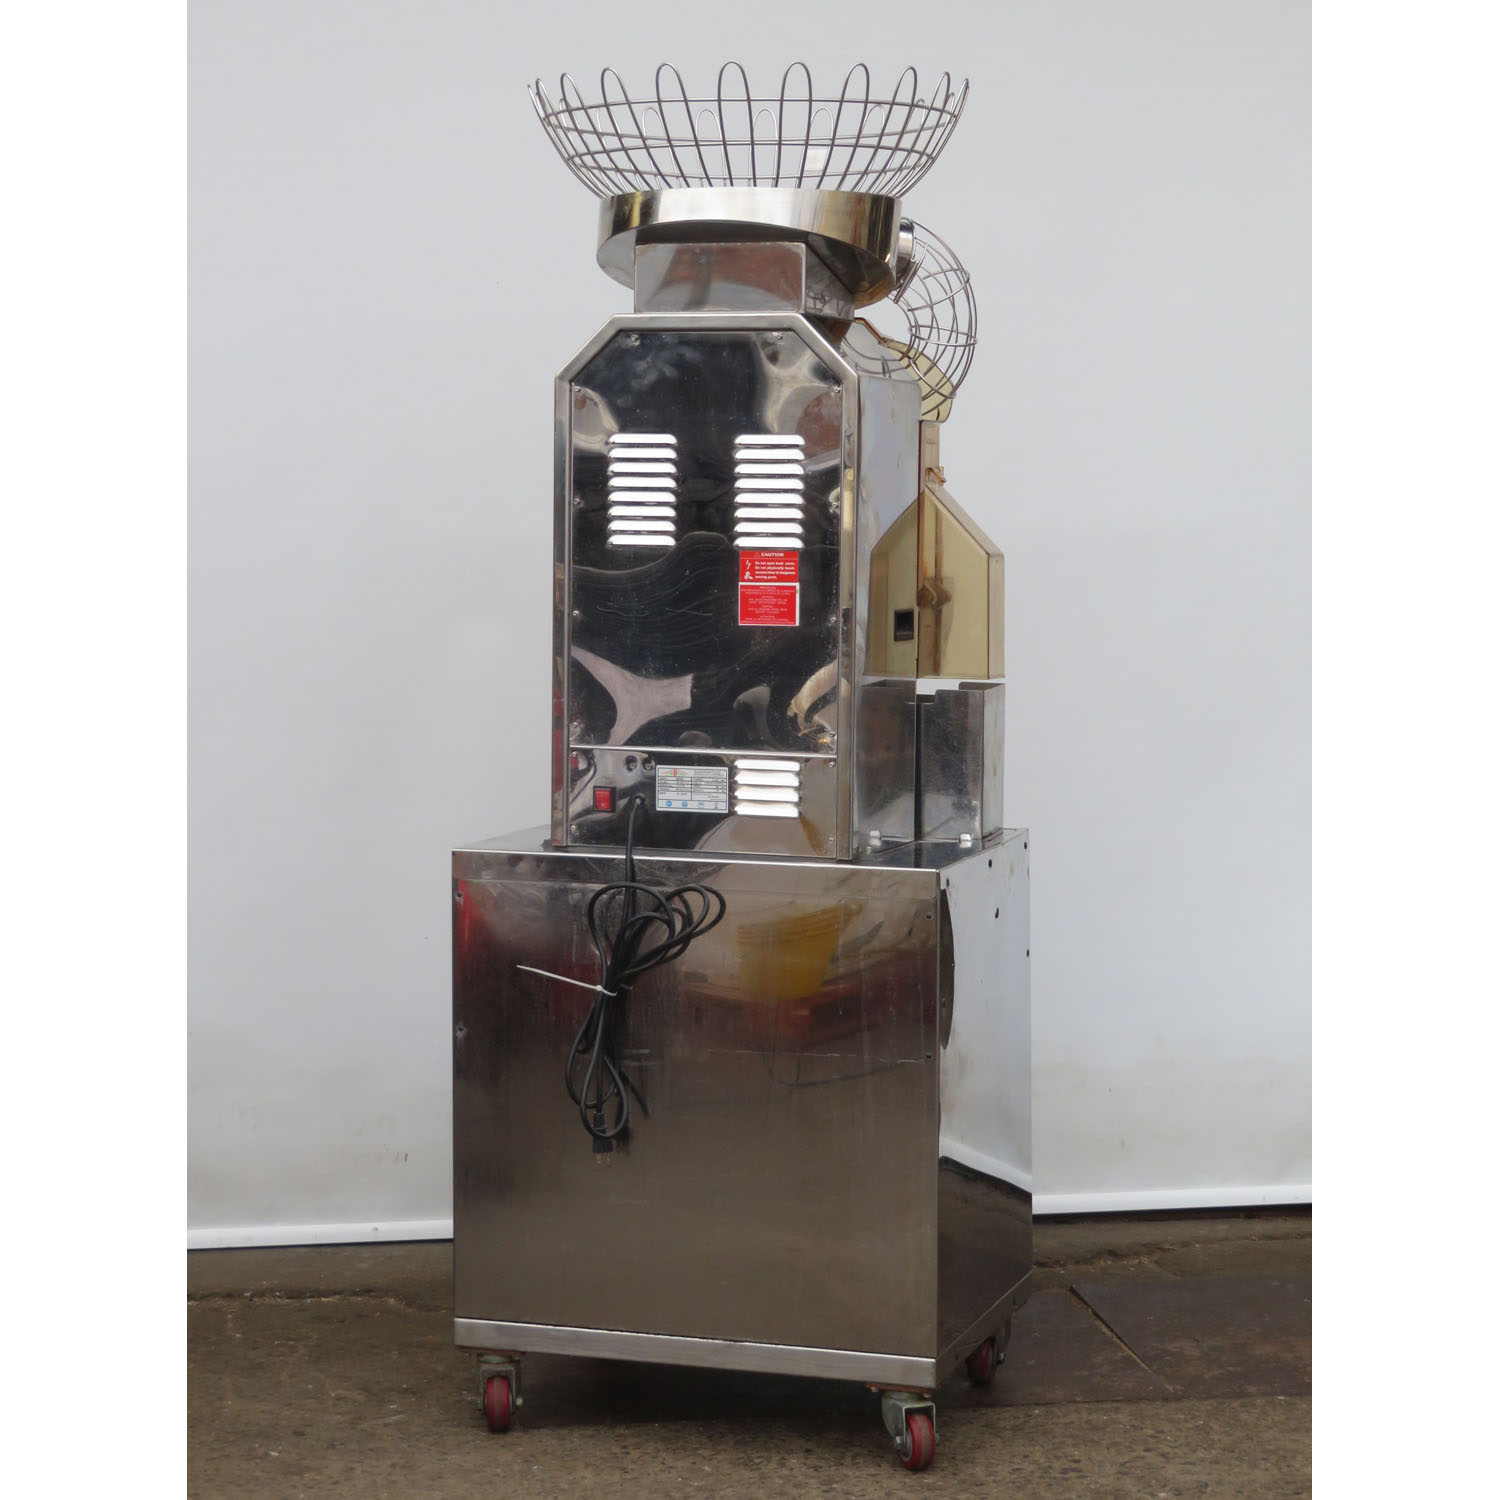 Citrocasa 8000XB Juicer, Used Excellent Condition image 2